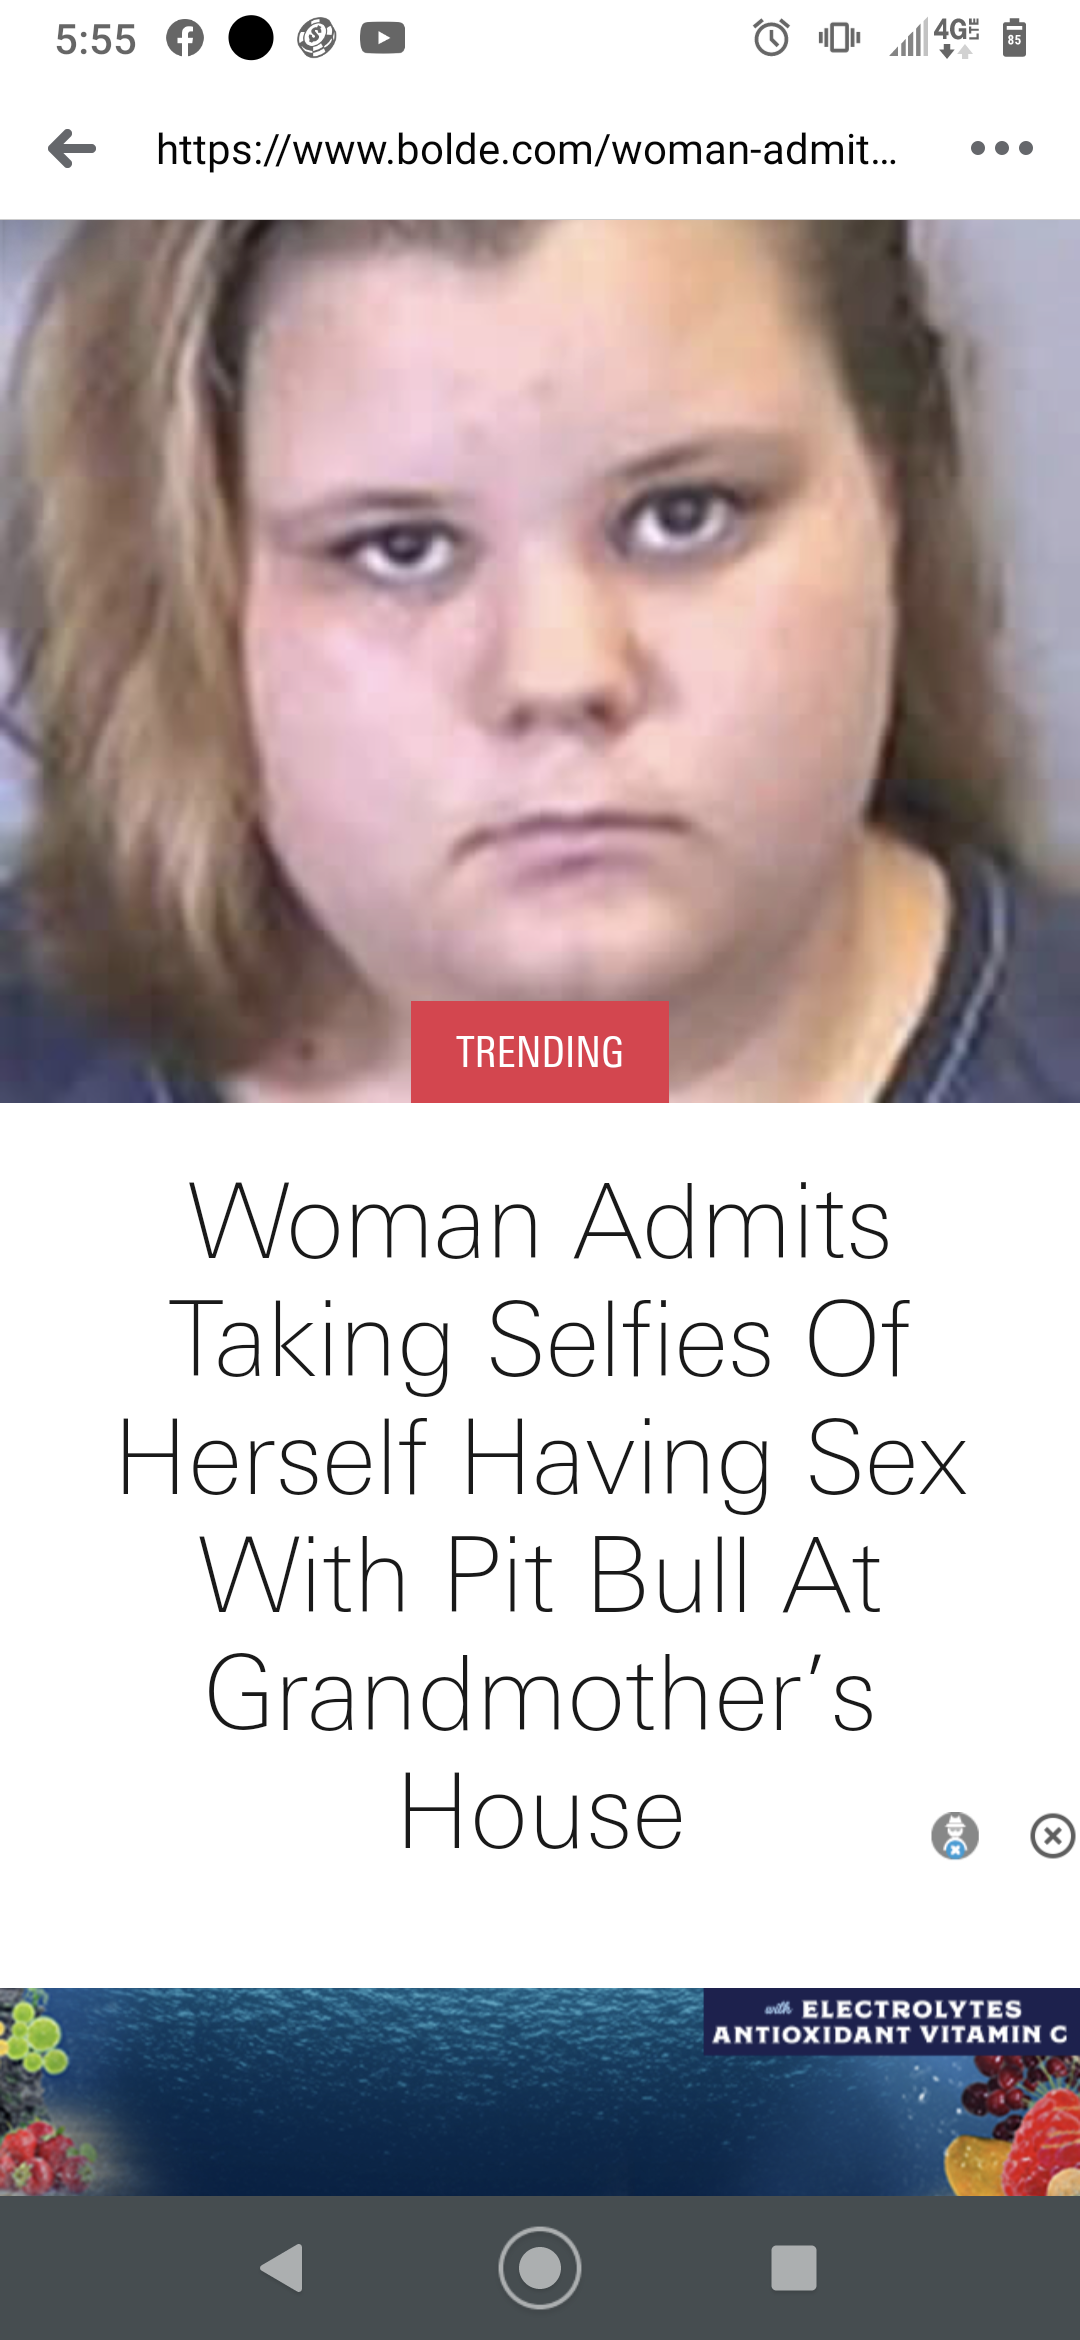 head - 5.55 Oo https admit.. Trending Woman Admits Taking Selfies Of Herself Having Sex With Pit Bull At Grandmother's House Electrolytes Antioxidant Vitamin